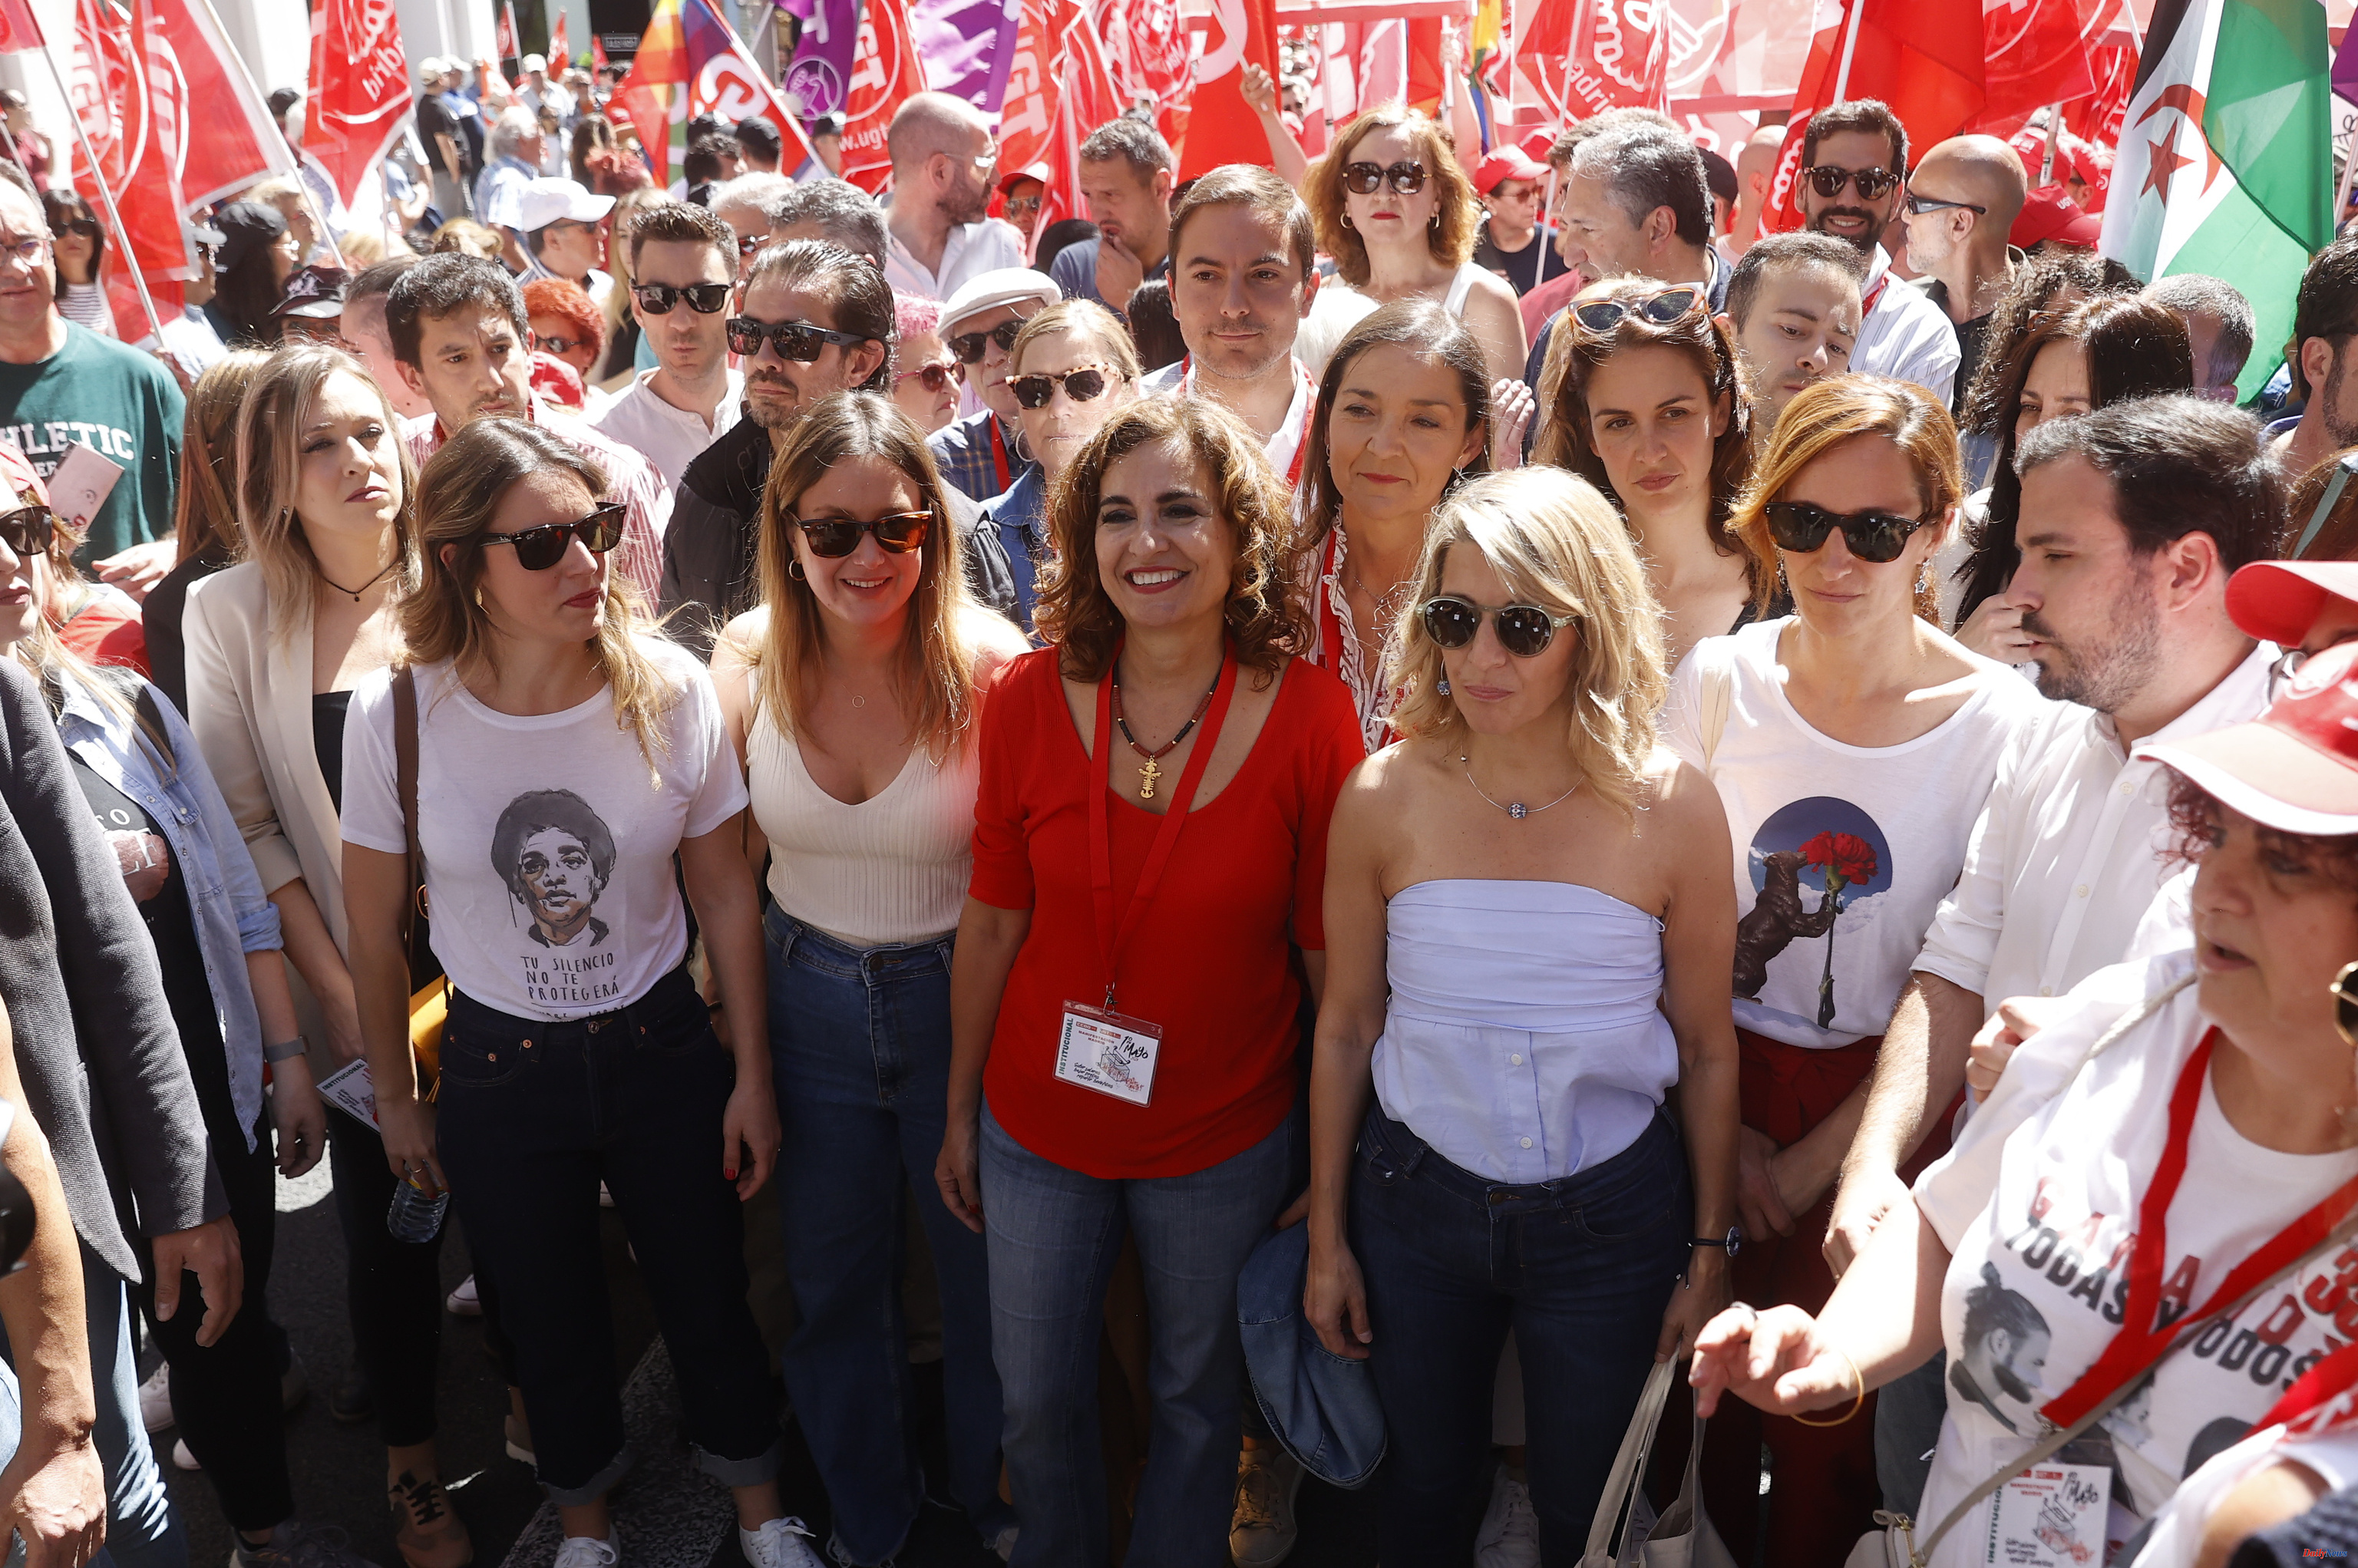 May 1st The five leftists exhibit their fracture: Irene Montero walks before Yolanda Díaz with the slogan "Your silence will not protect you"